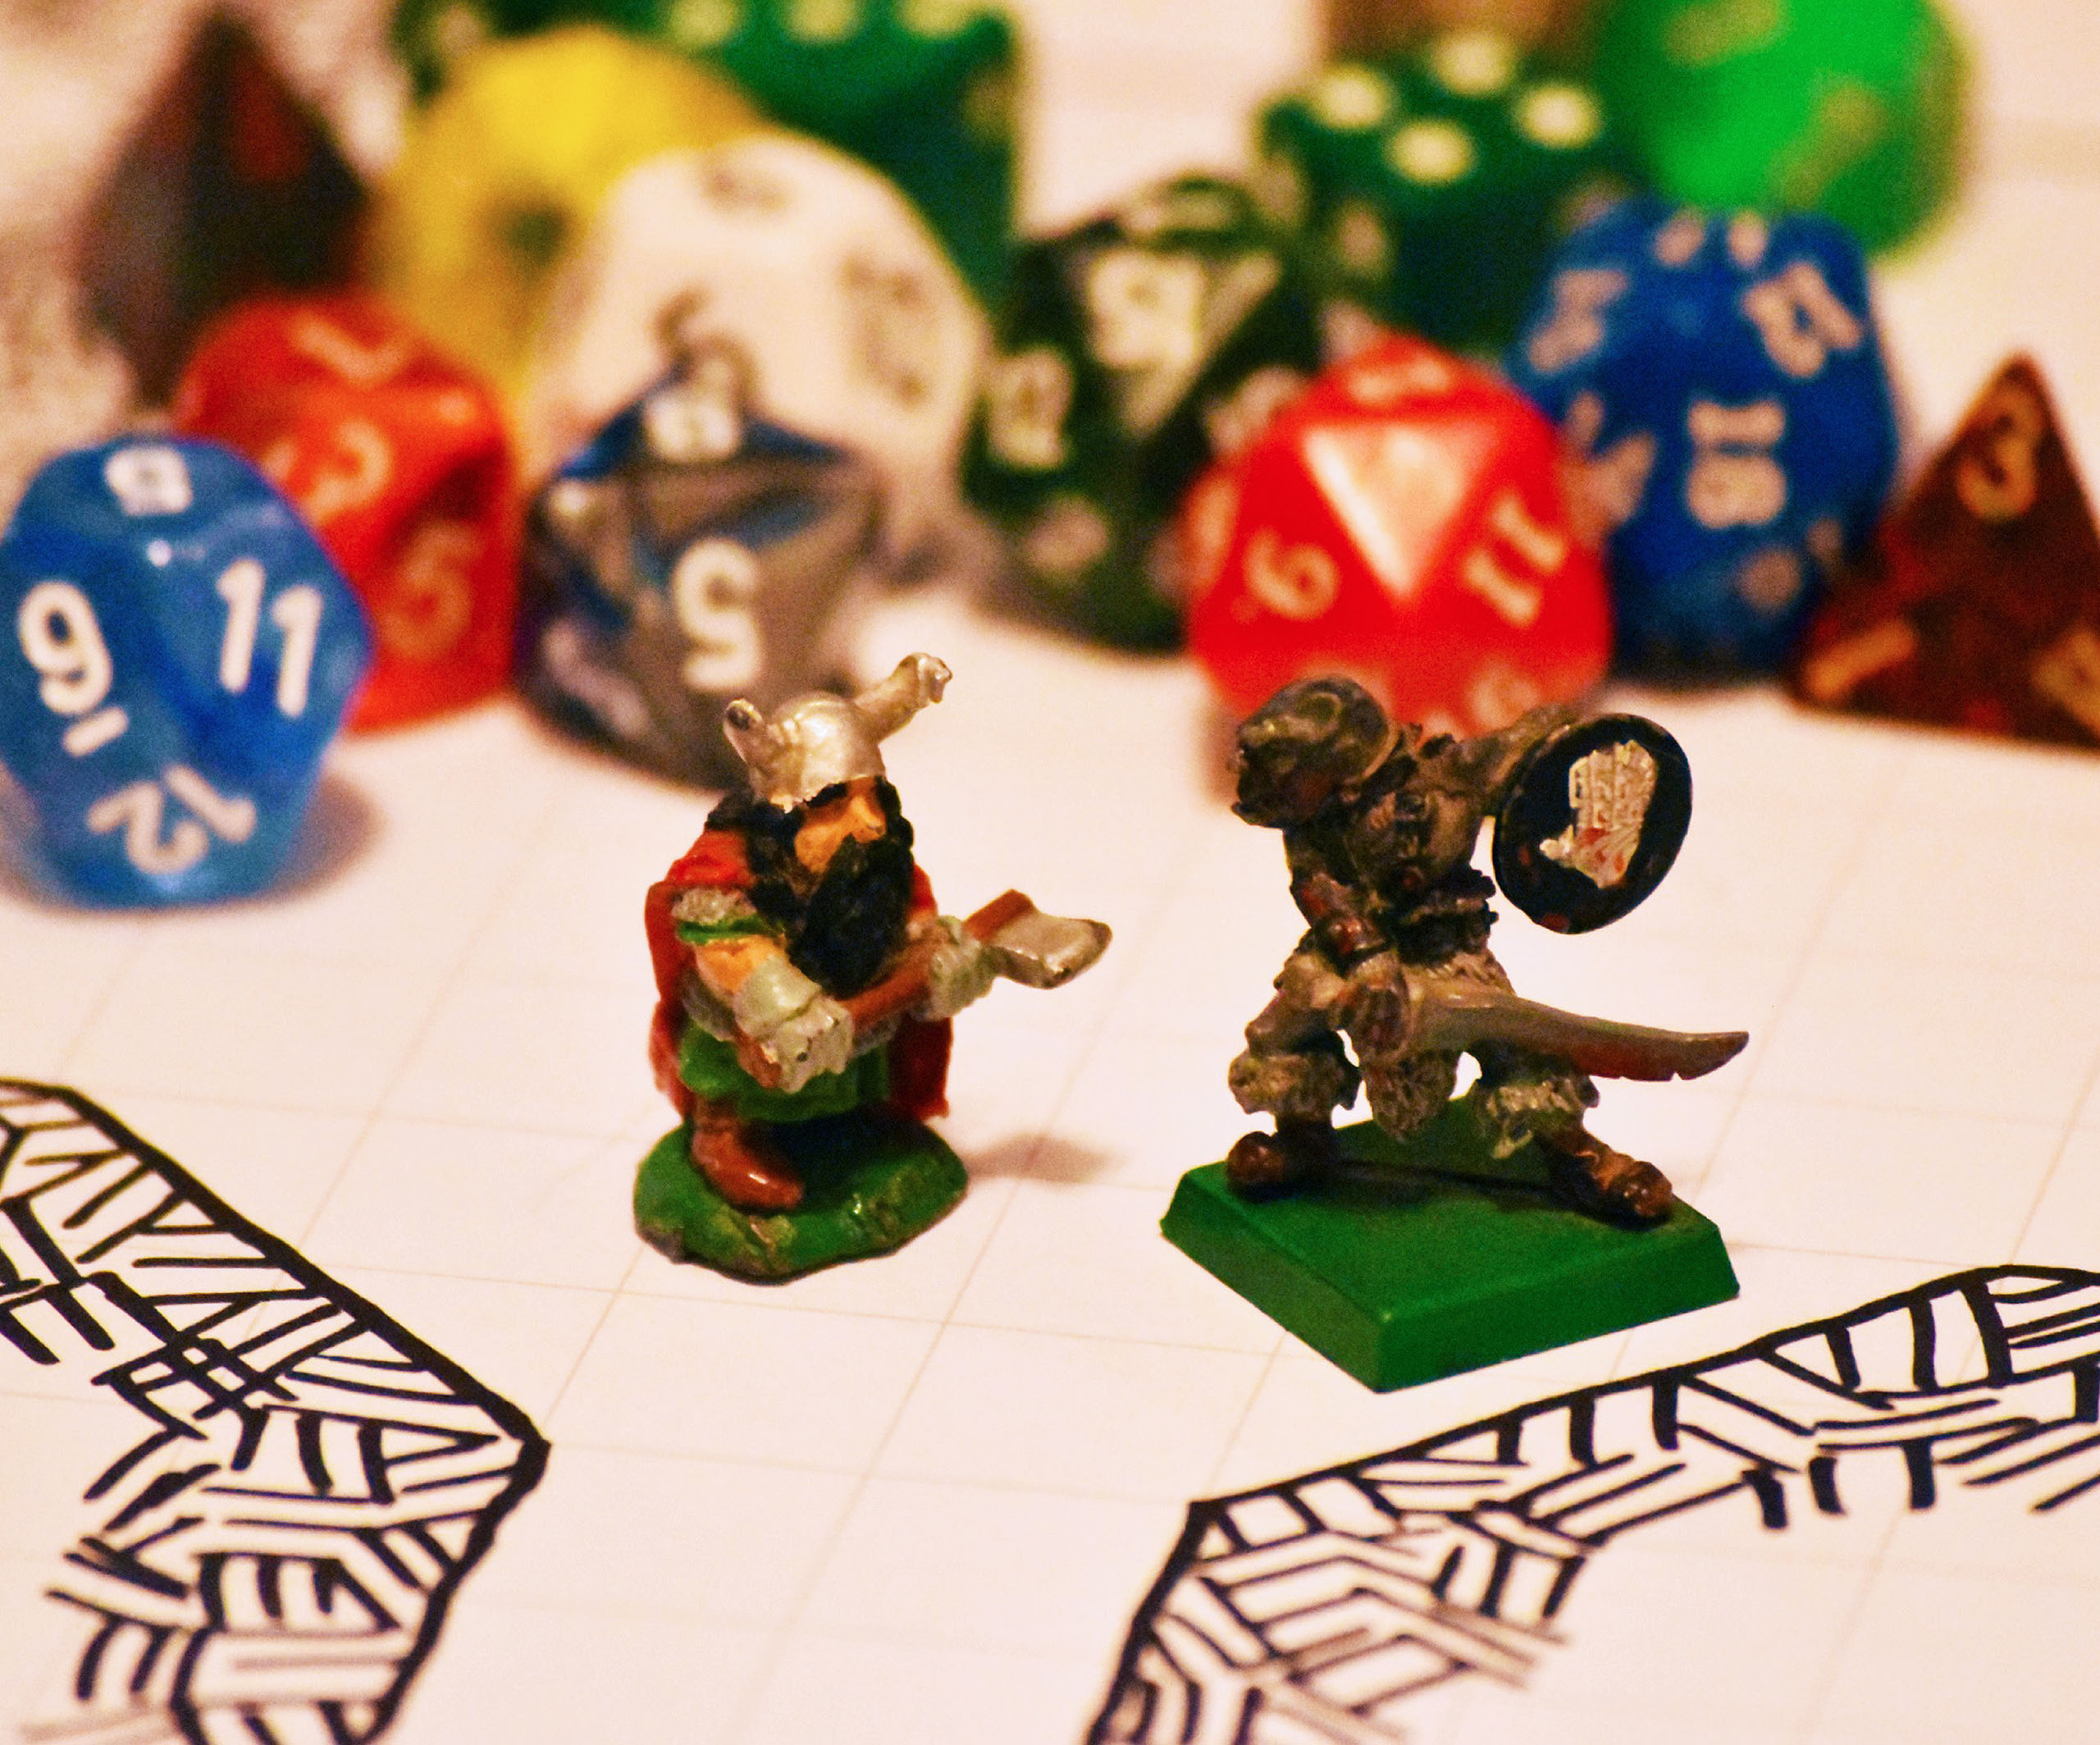 Embark on a mythical quest with this teens-only, immersive Dungeons and Dragons experience run in partnership with the dungeon masters from Awakened Fables.